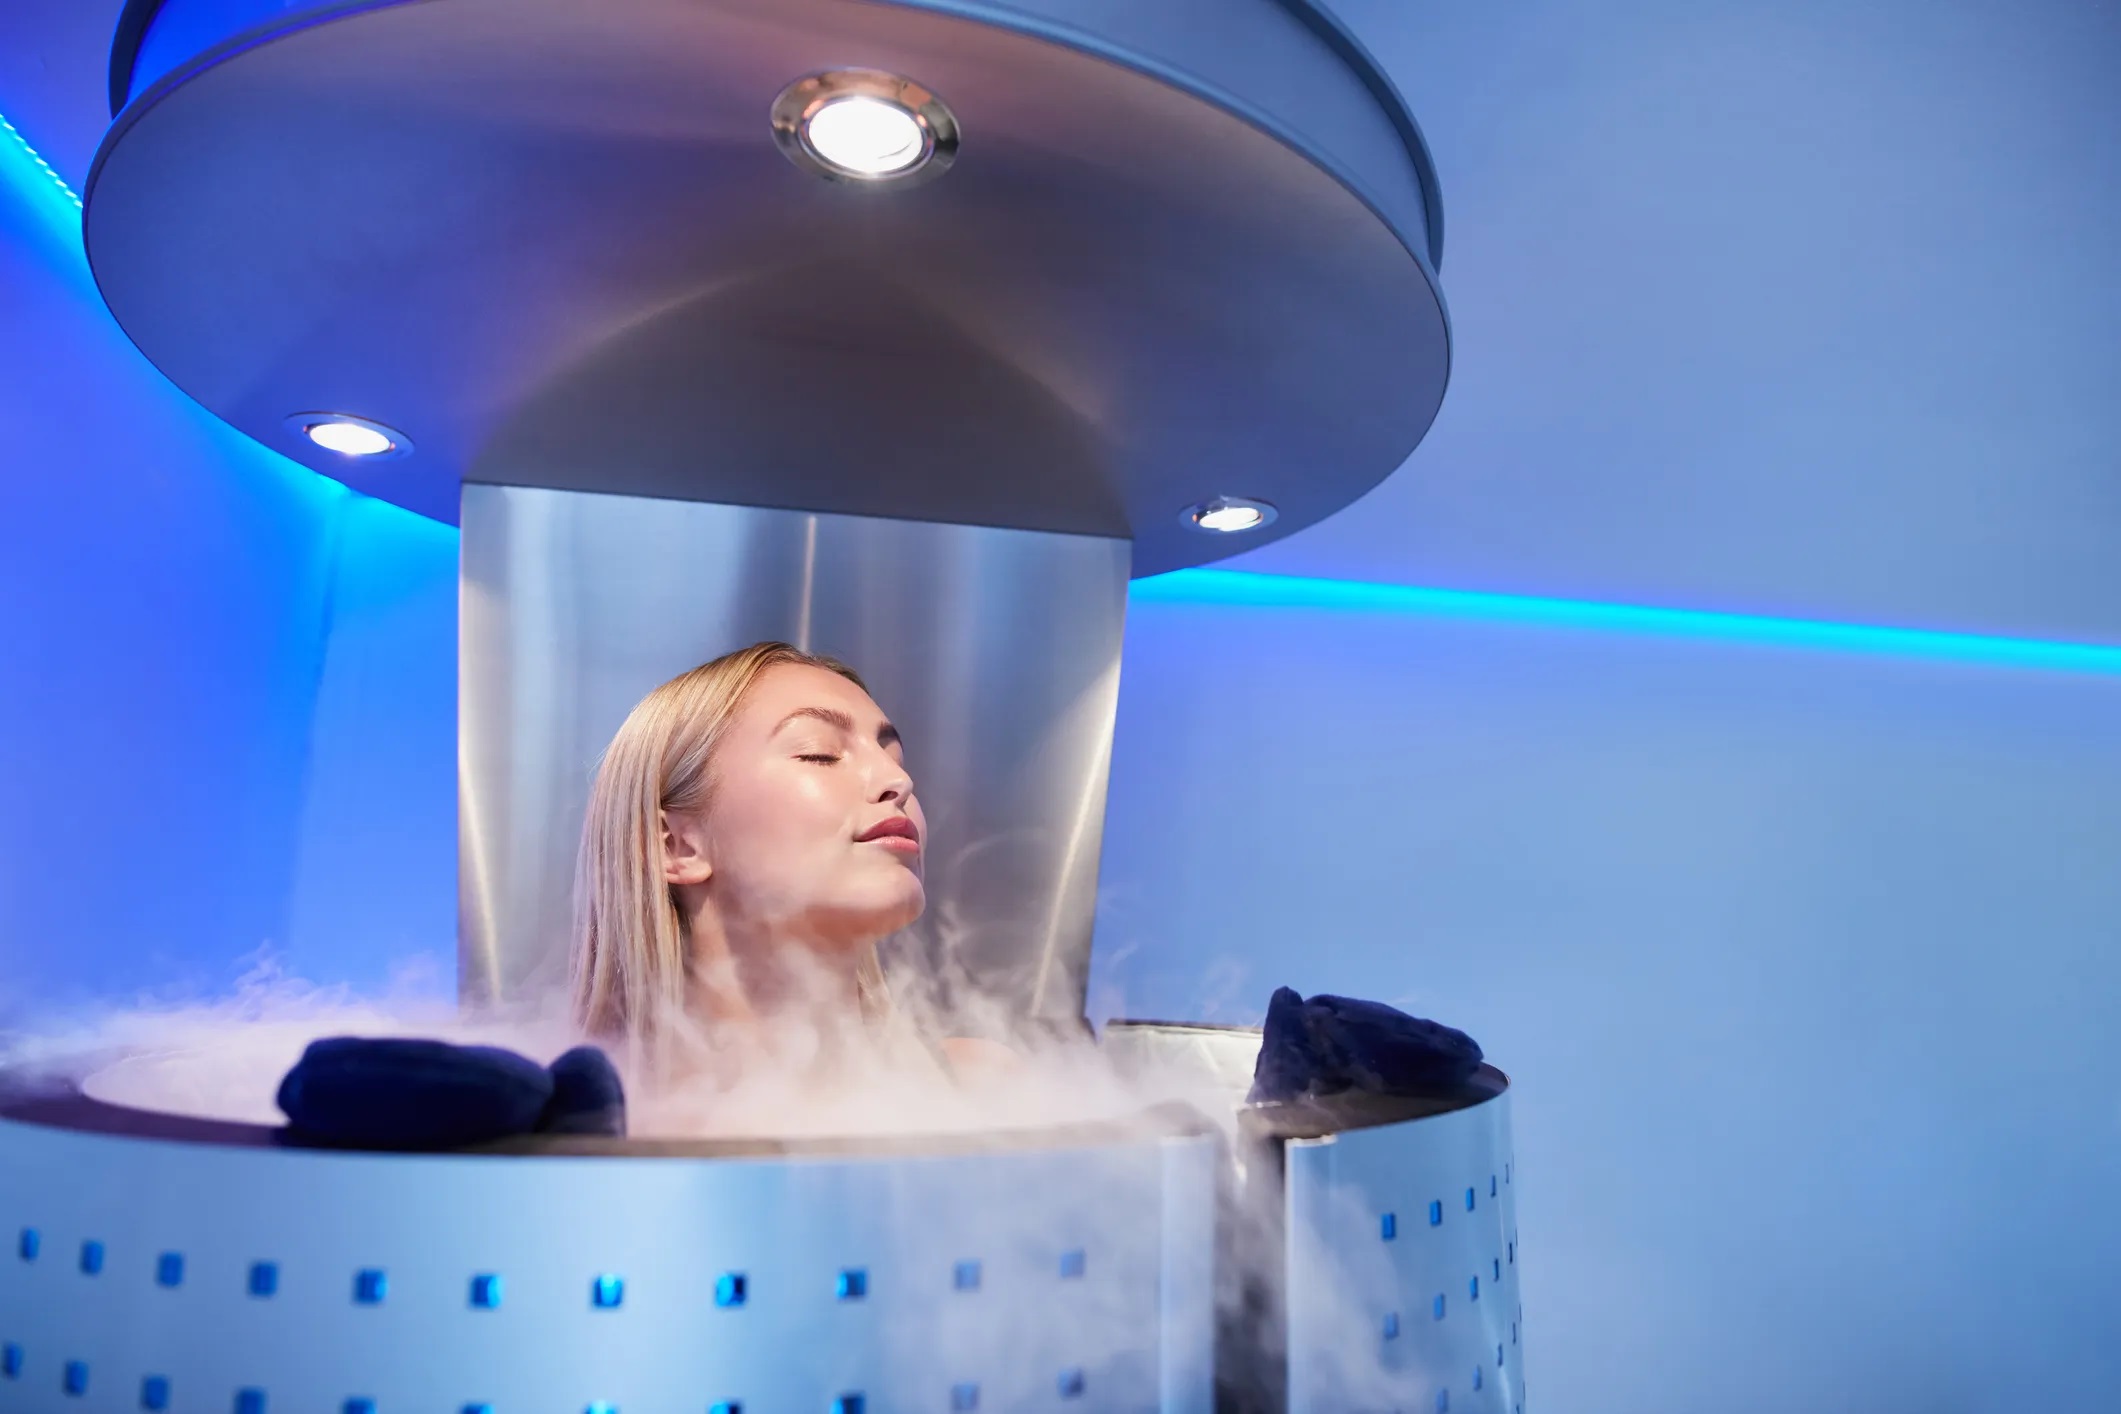 Health 101: What Are The Great Benefits of Cryotherapy?